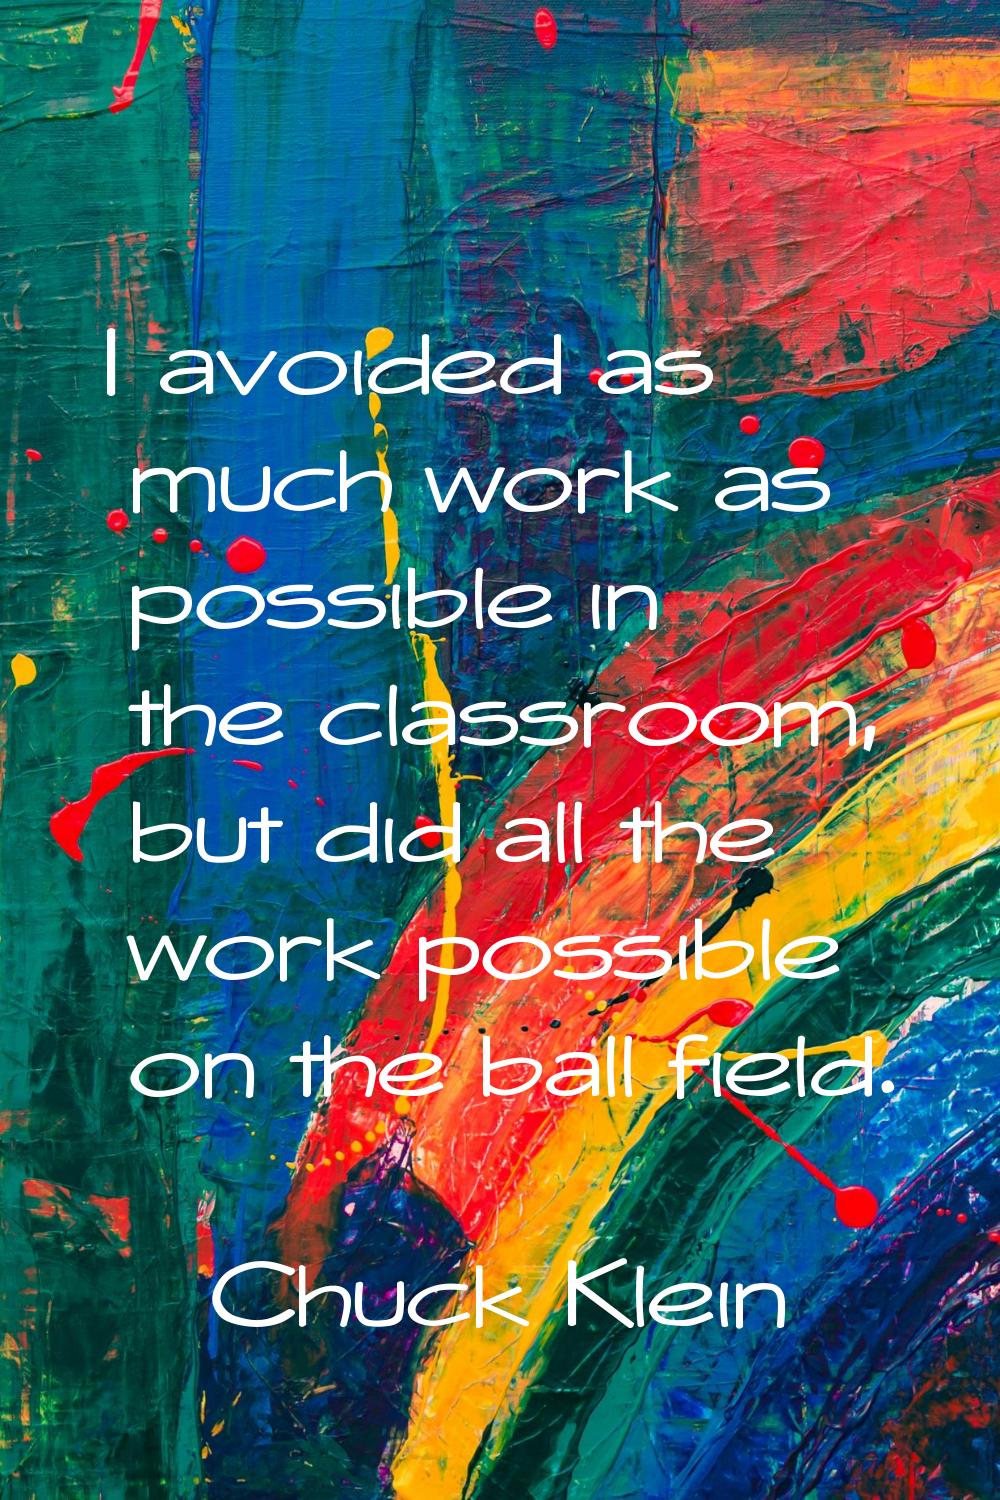 I avoided as much work as possible in the classroom, but did all the work possible on the ball fiel